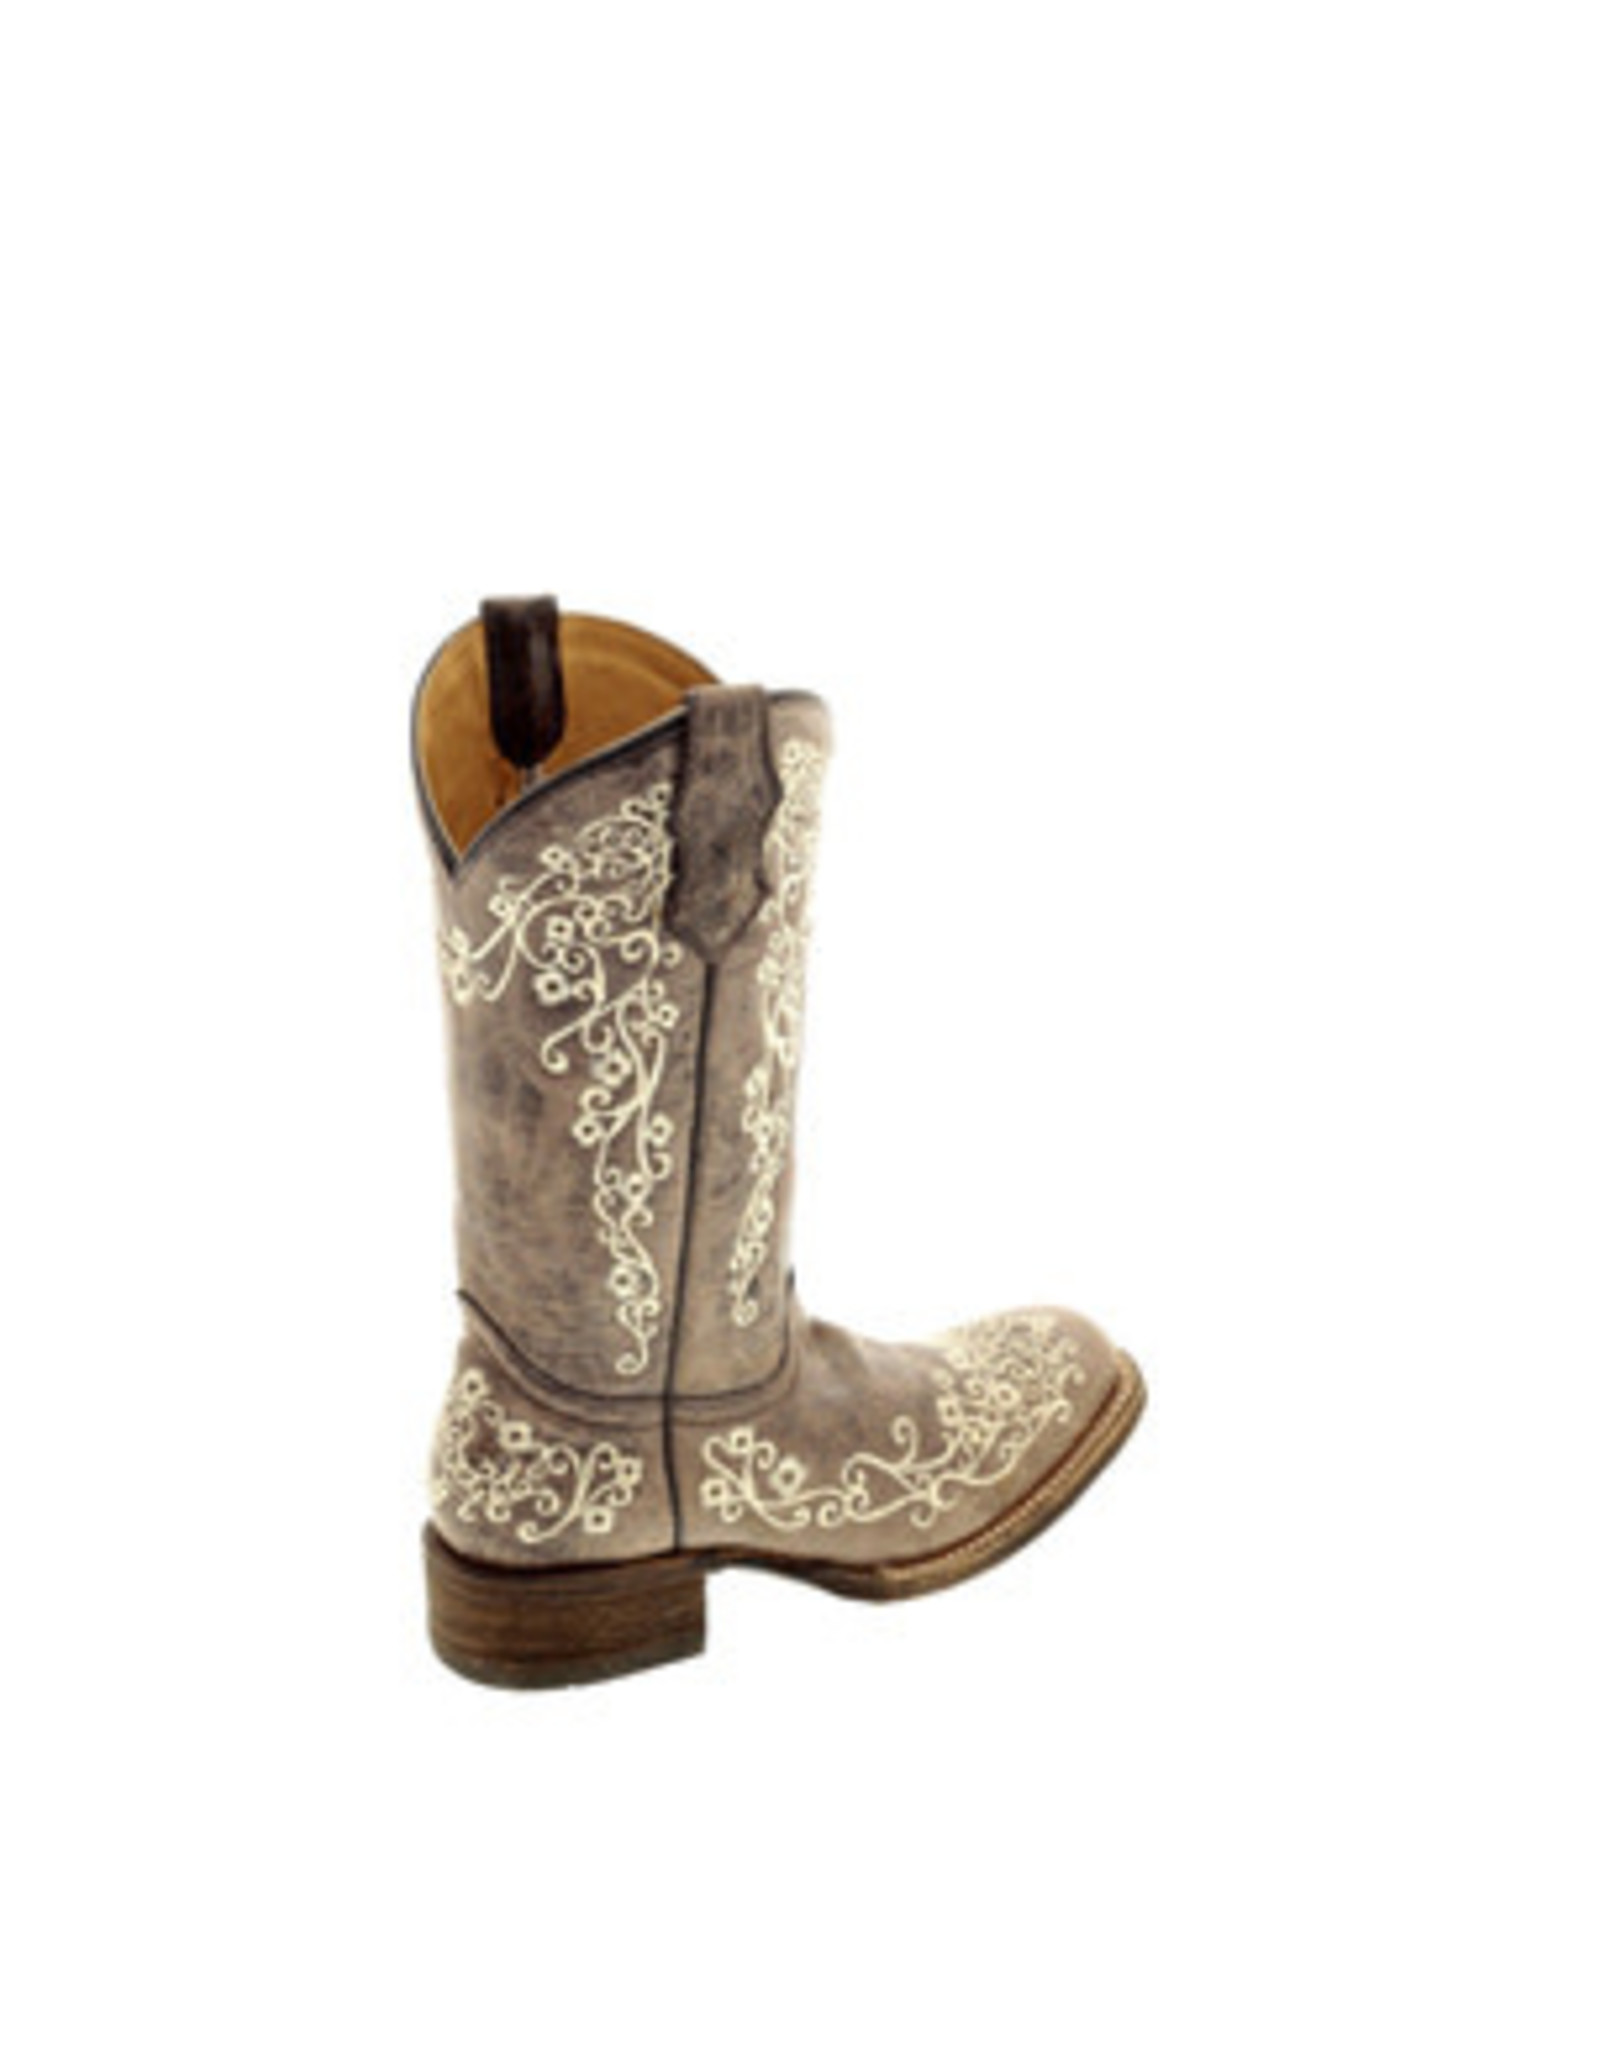 Corral Ladies Square Toe A2663 Wedding Boots